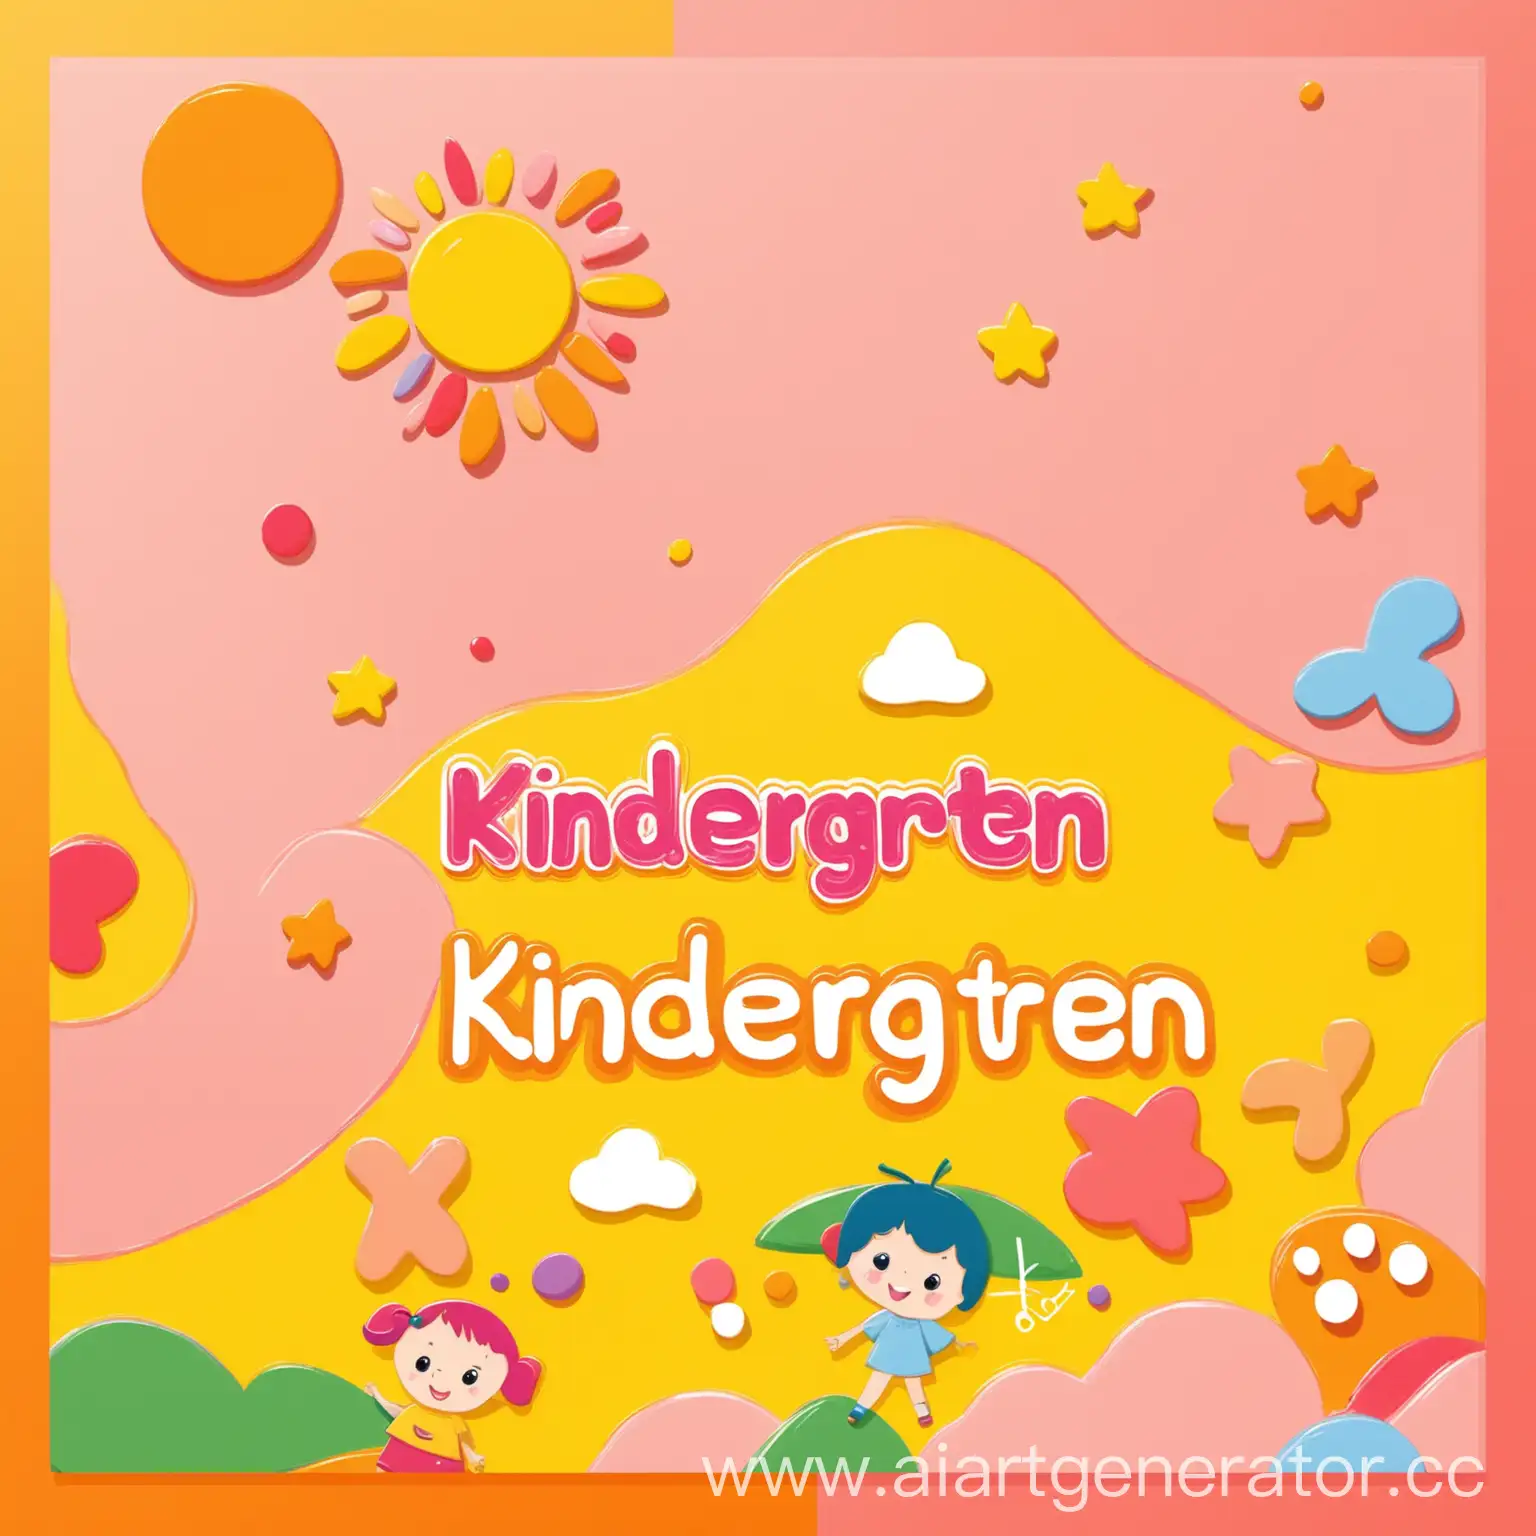 Vibrant-Kindergarten-Album-Cover-with-Yellow-Orange-and-Pink-Palette